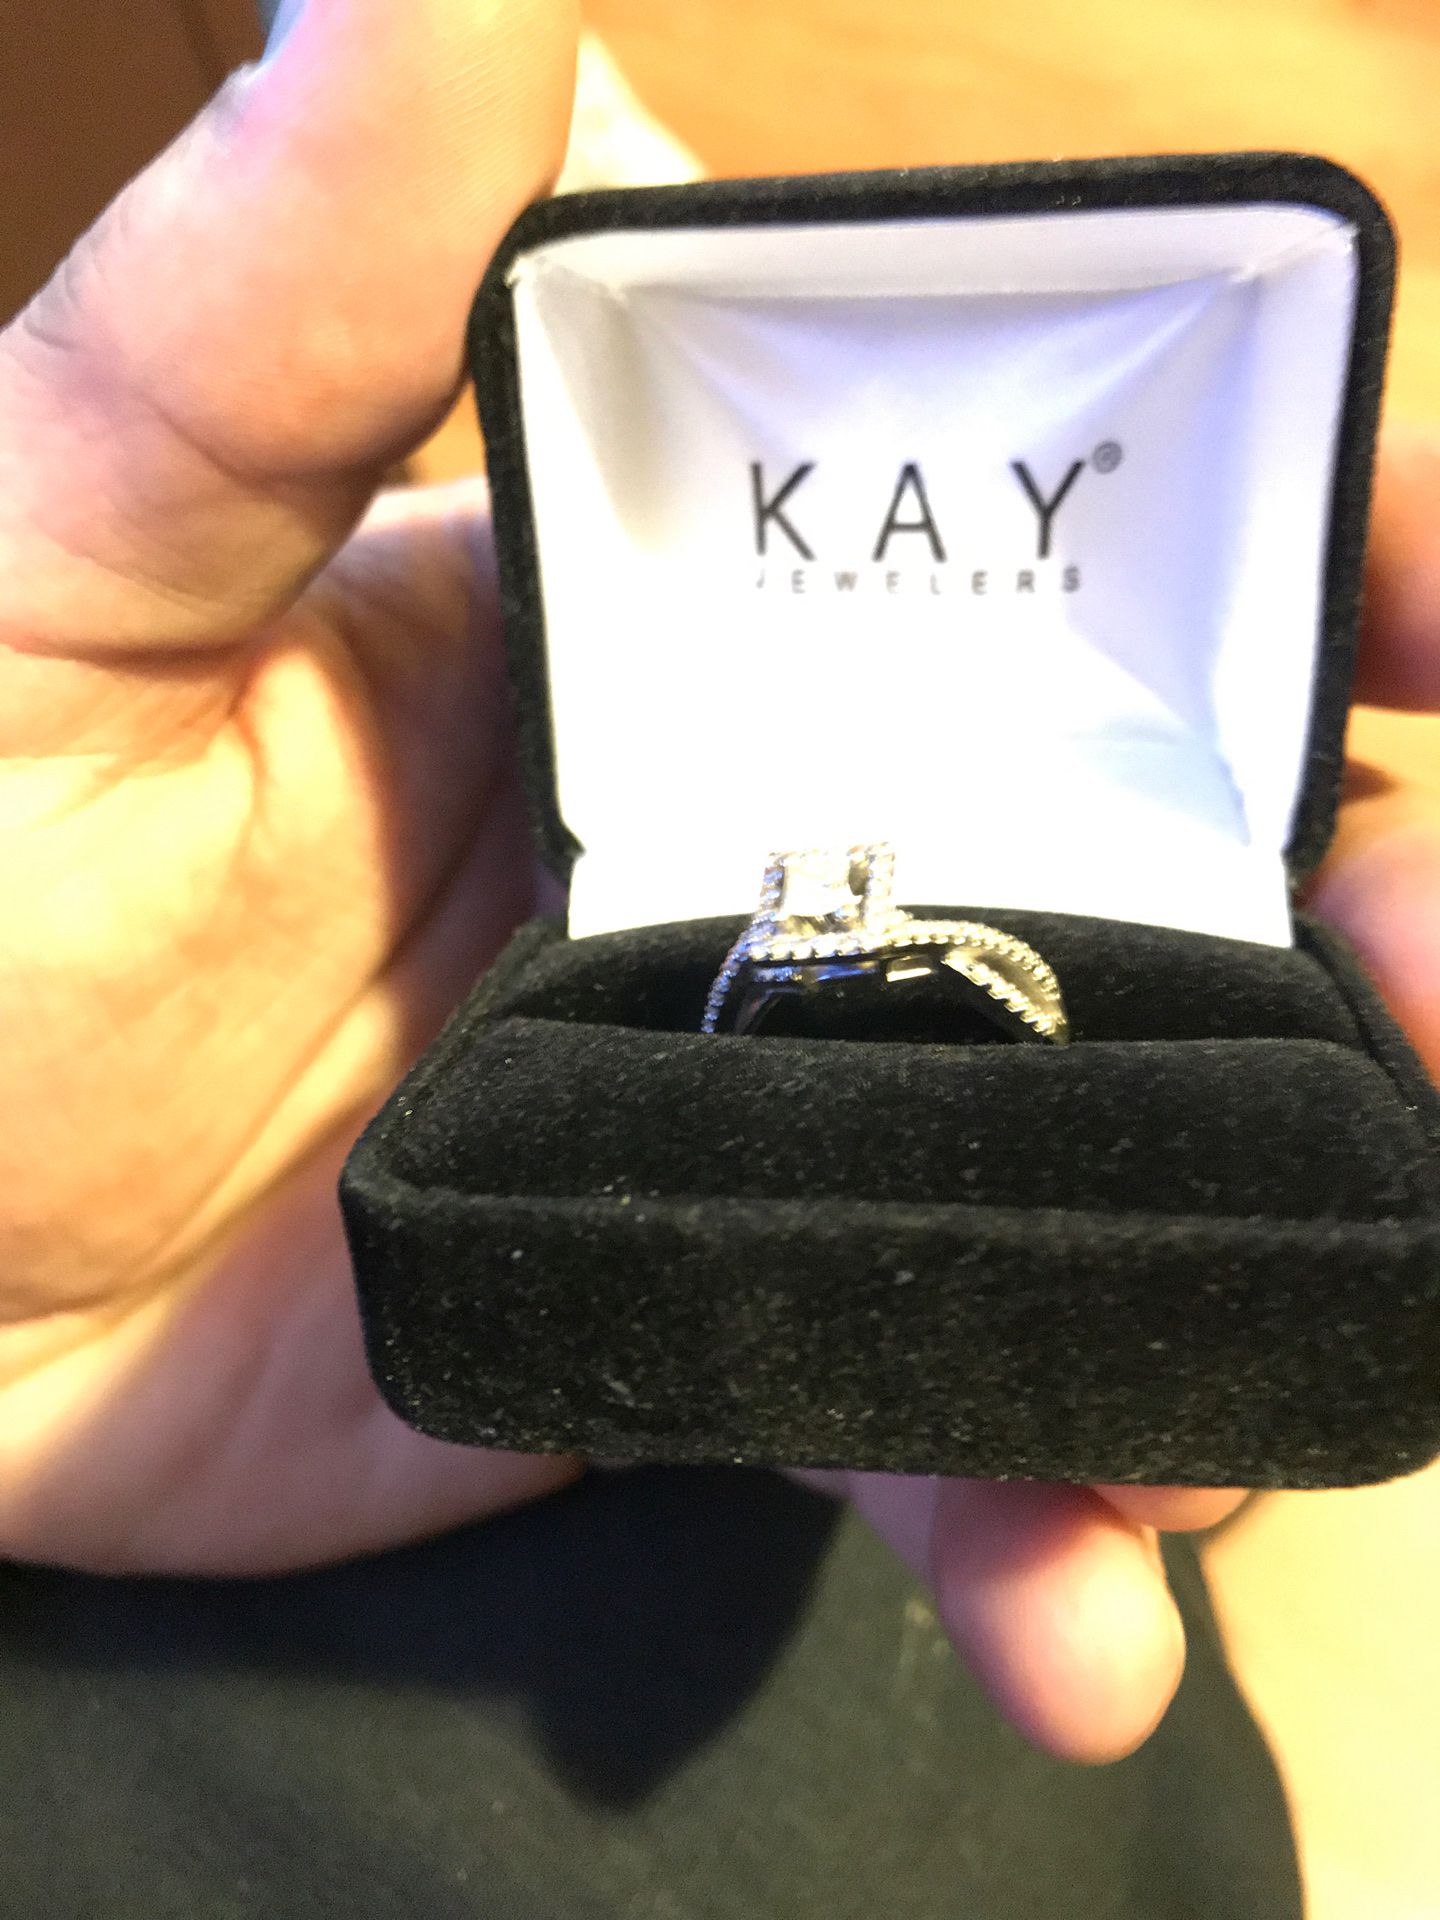 14k white gold Kay jewelers promise ring